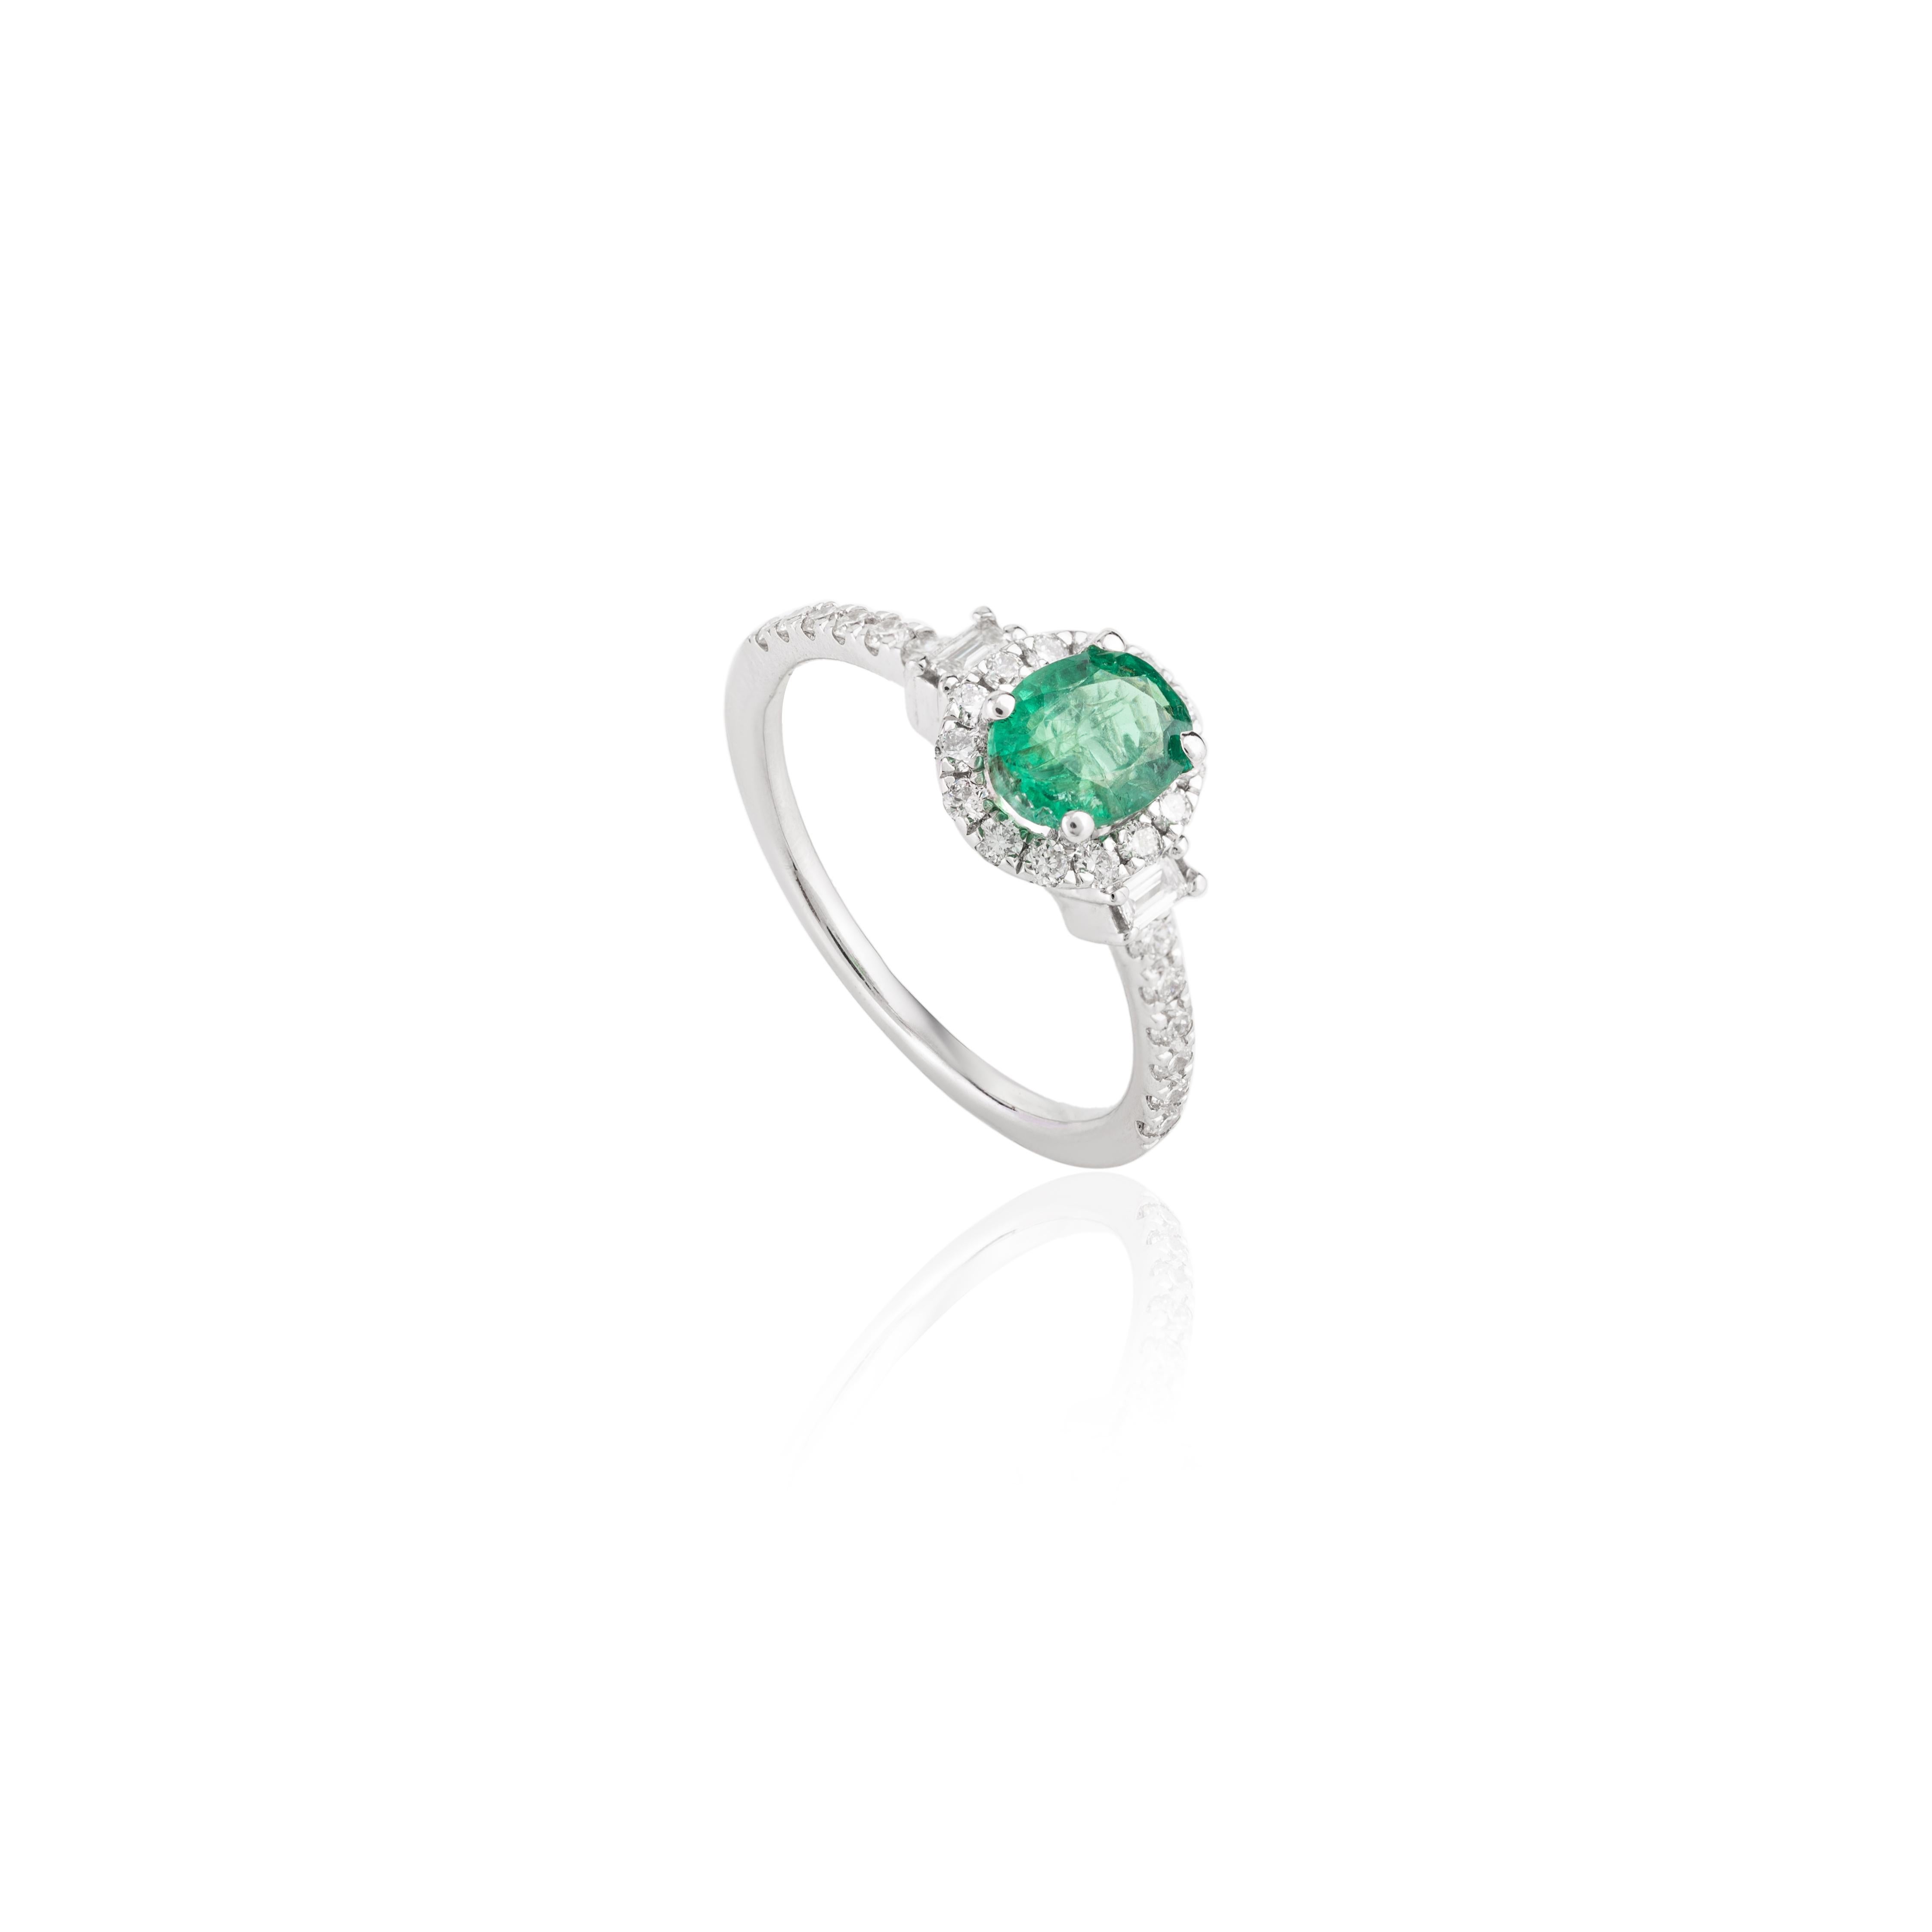 For Sale:  18 Karat White Gold Diamond Halo Emerald Engagement Ring for Her 8